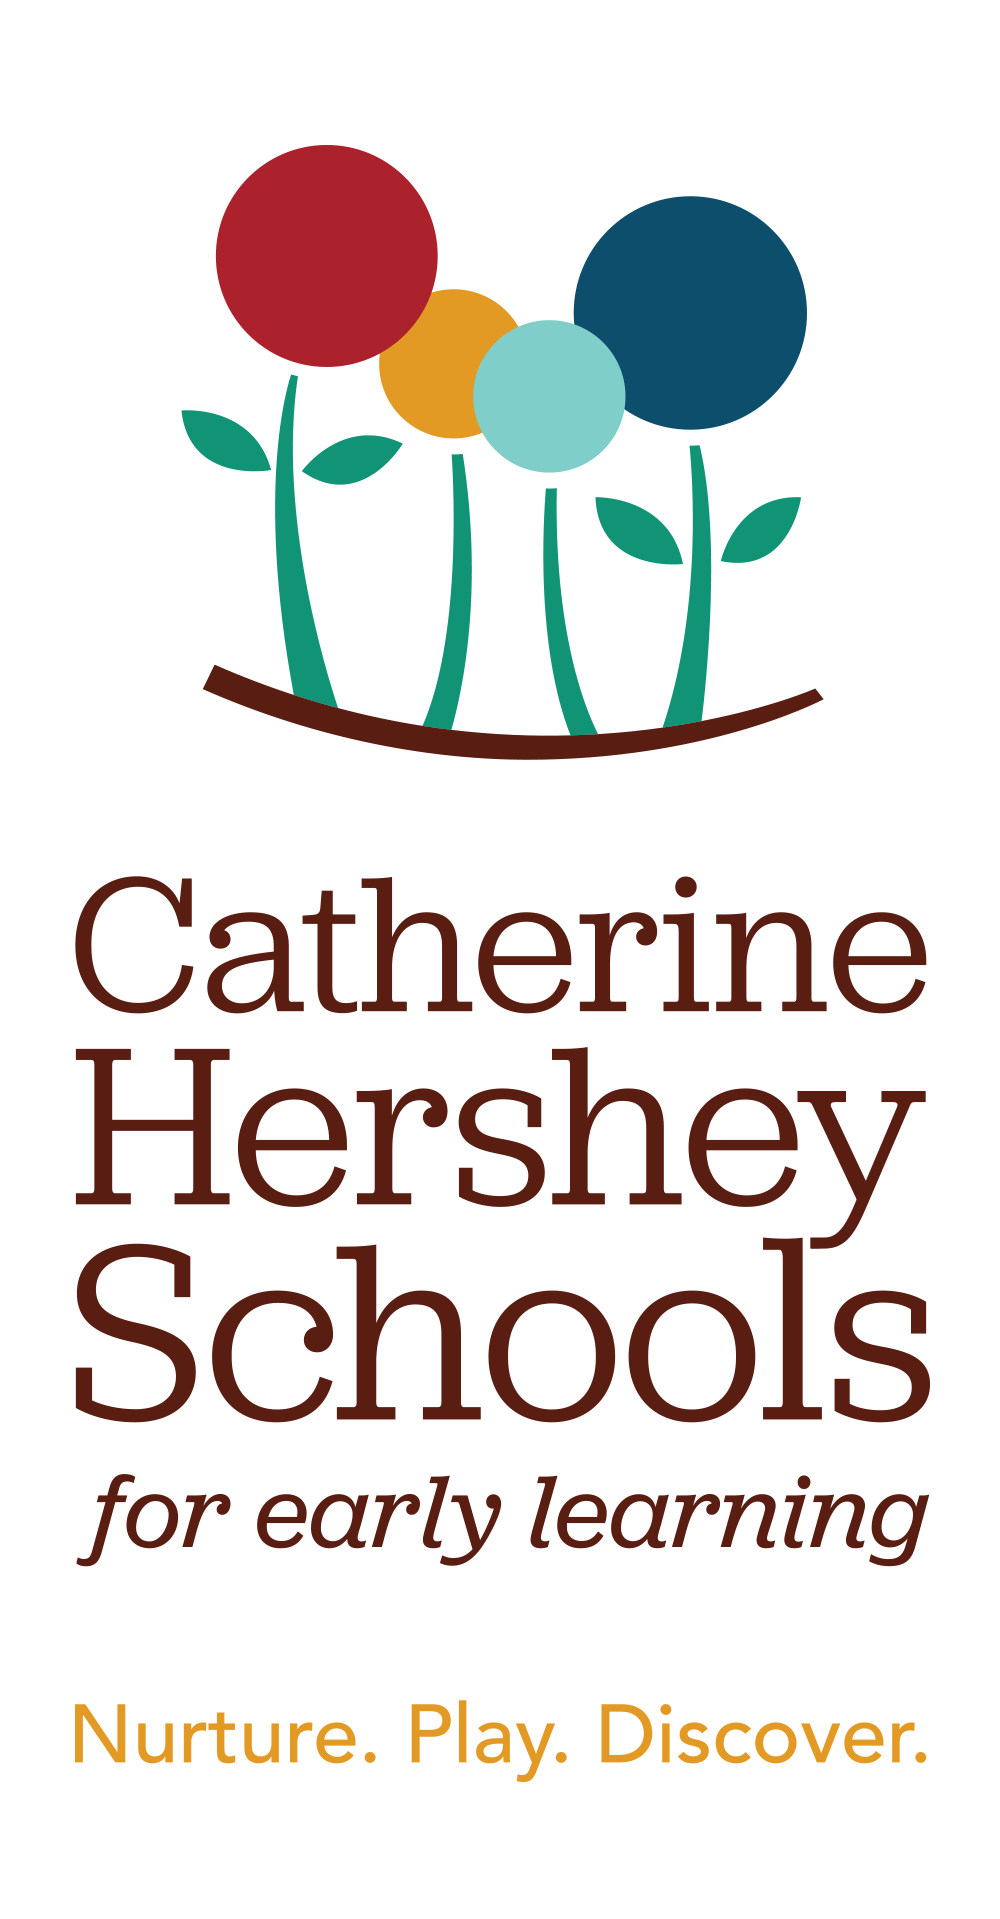 Kids Zone Sponsor - Catherine Hershey Schools for Early Learning